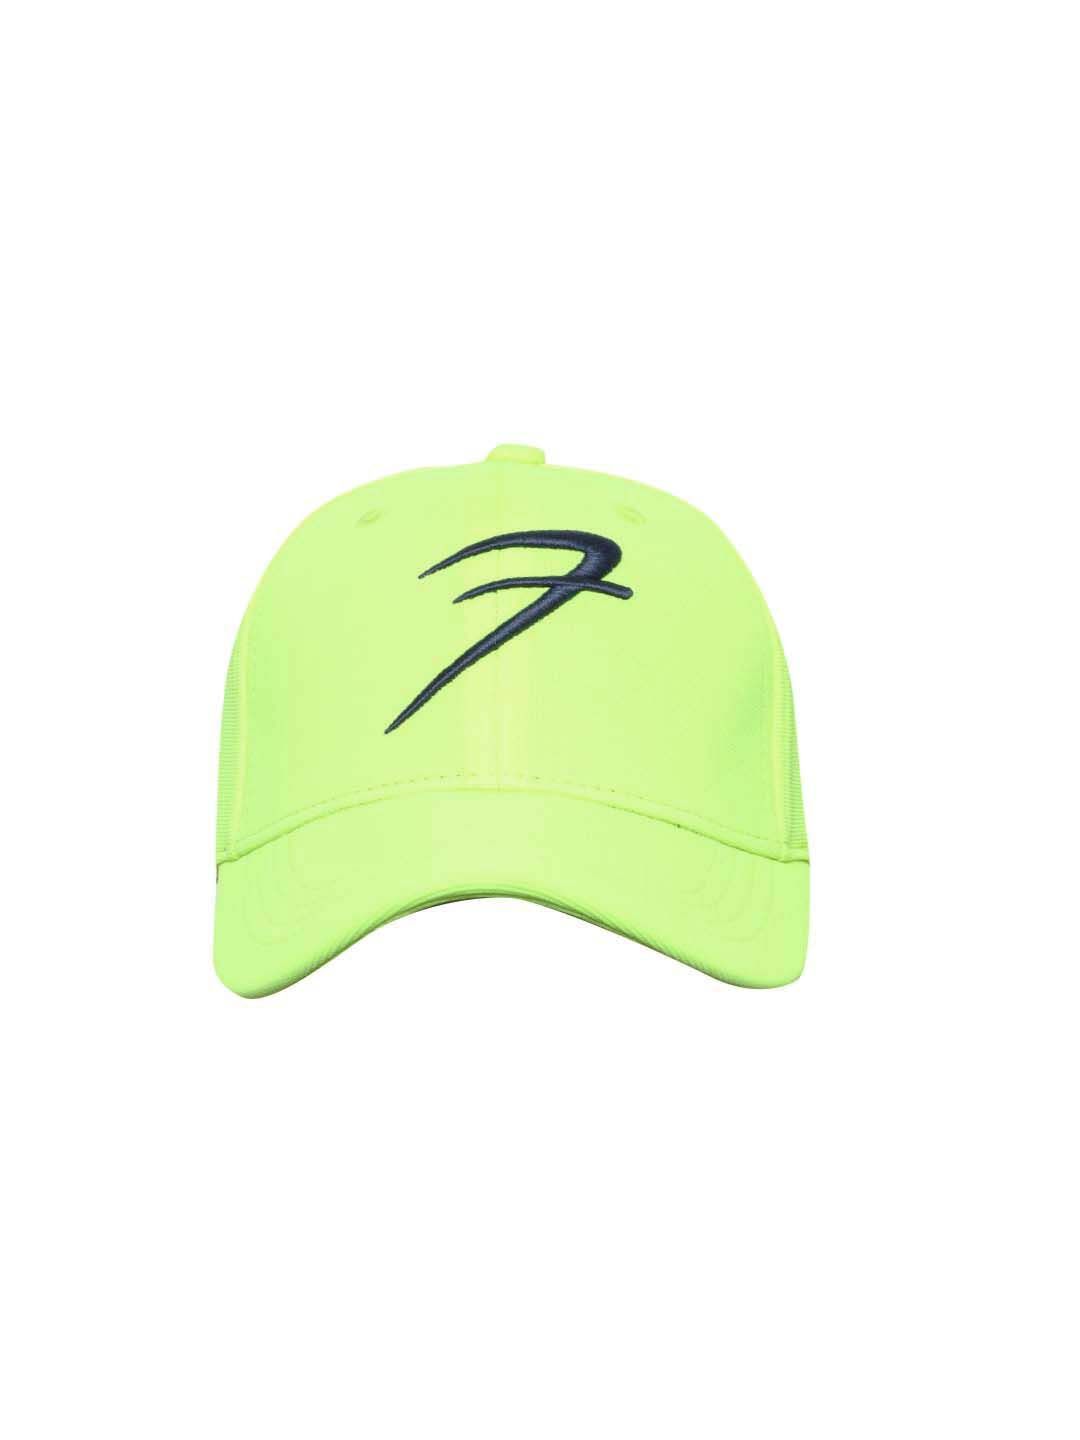 FUAARK Unisex Lime Green & Navy Blue Embroidered Baseball Cap Price in India